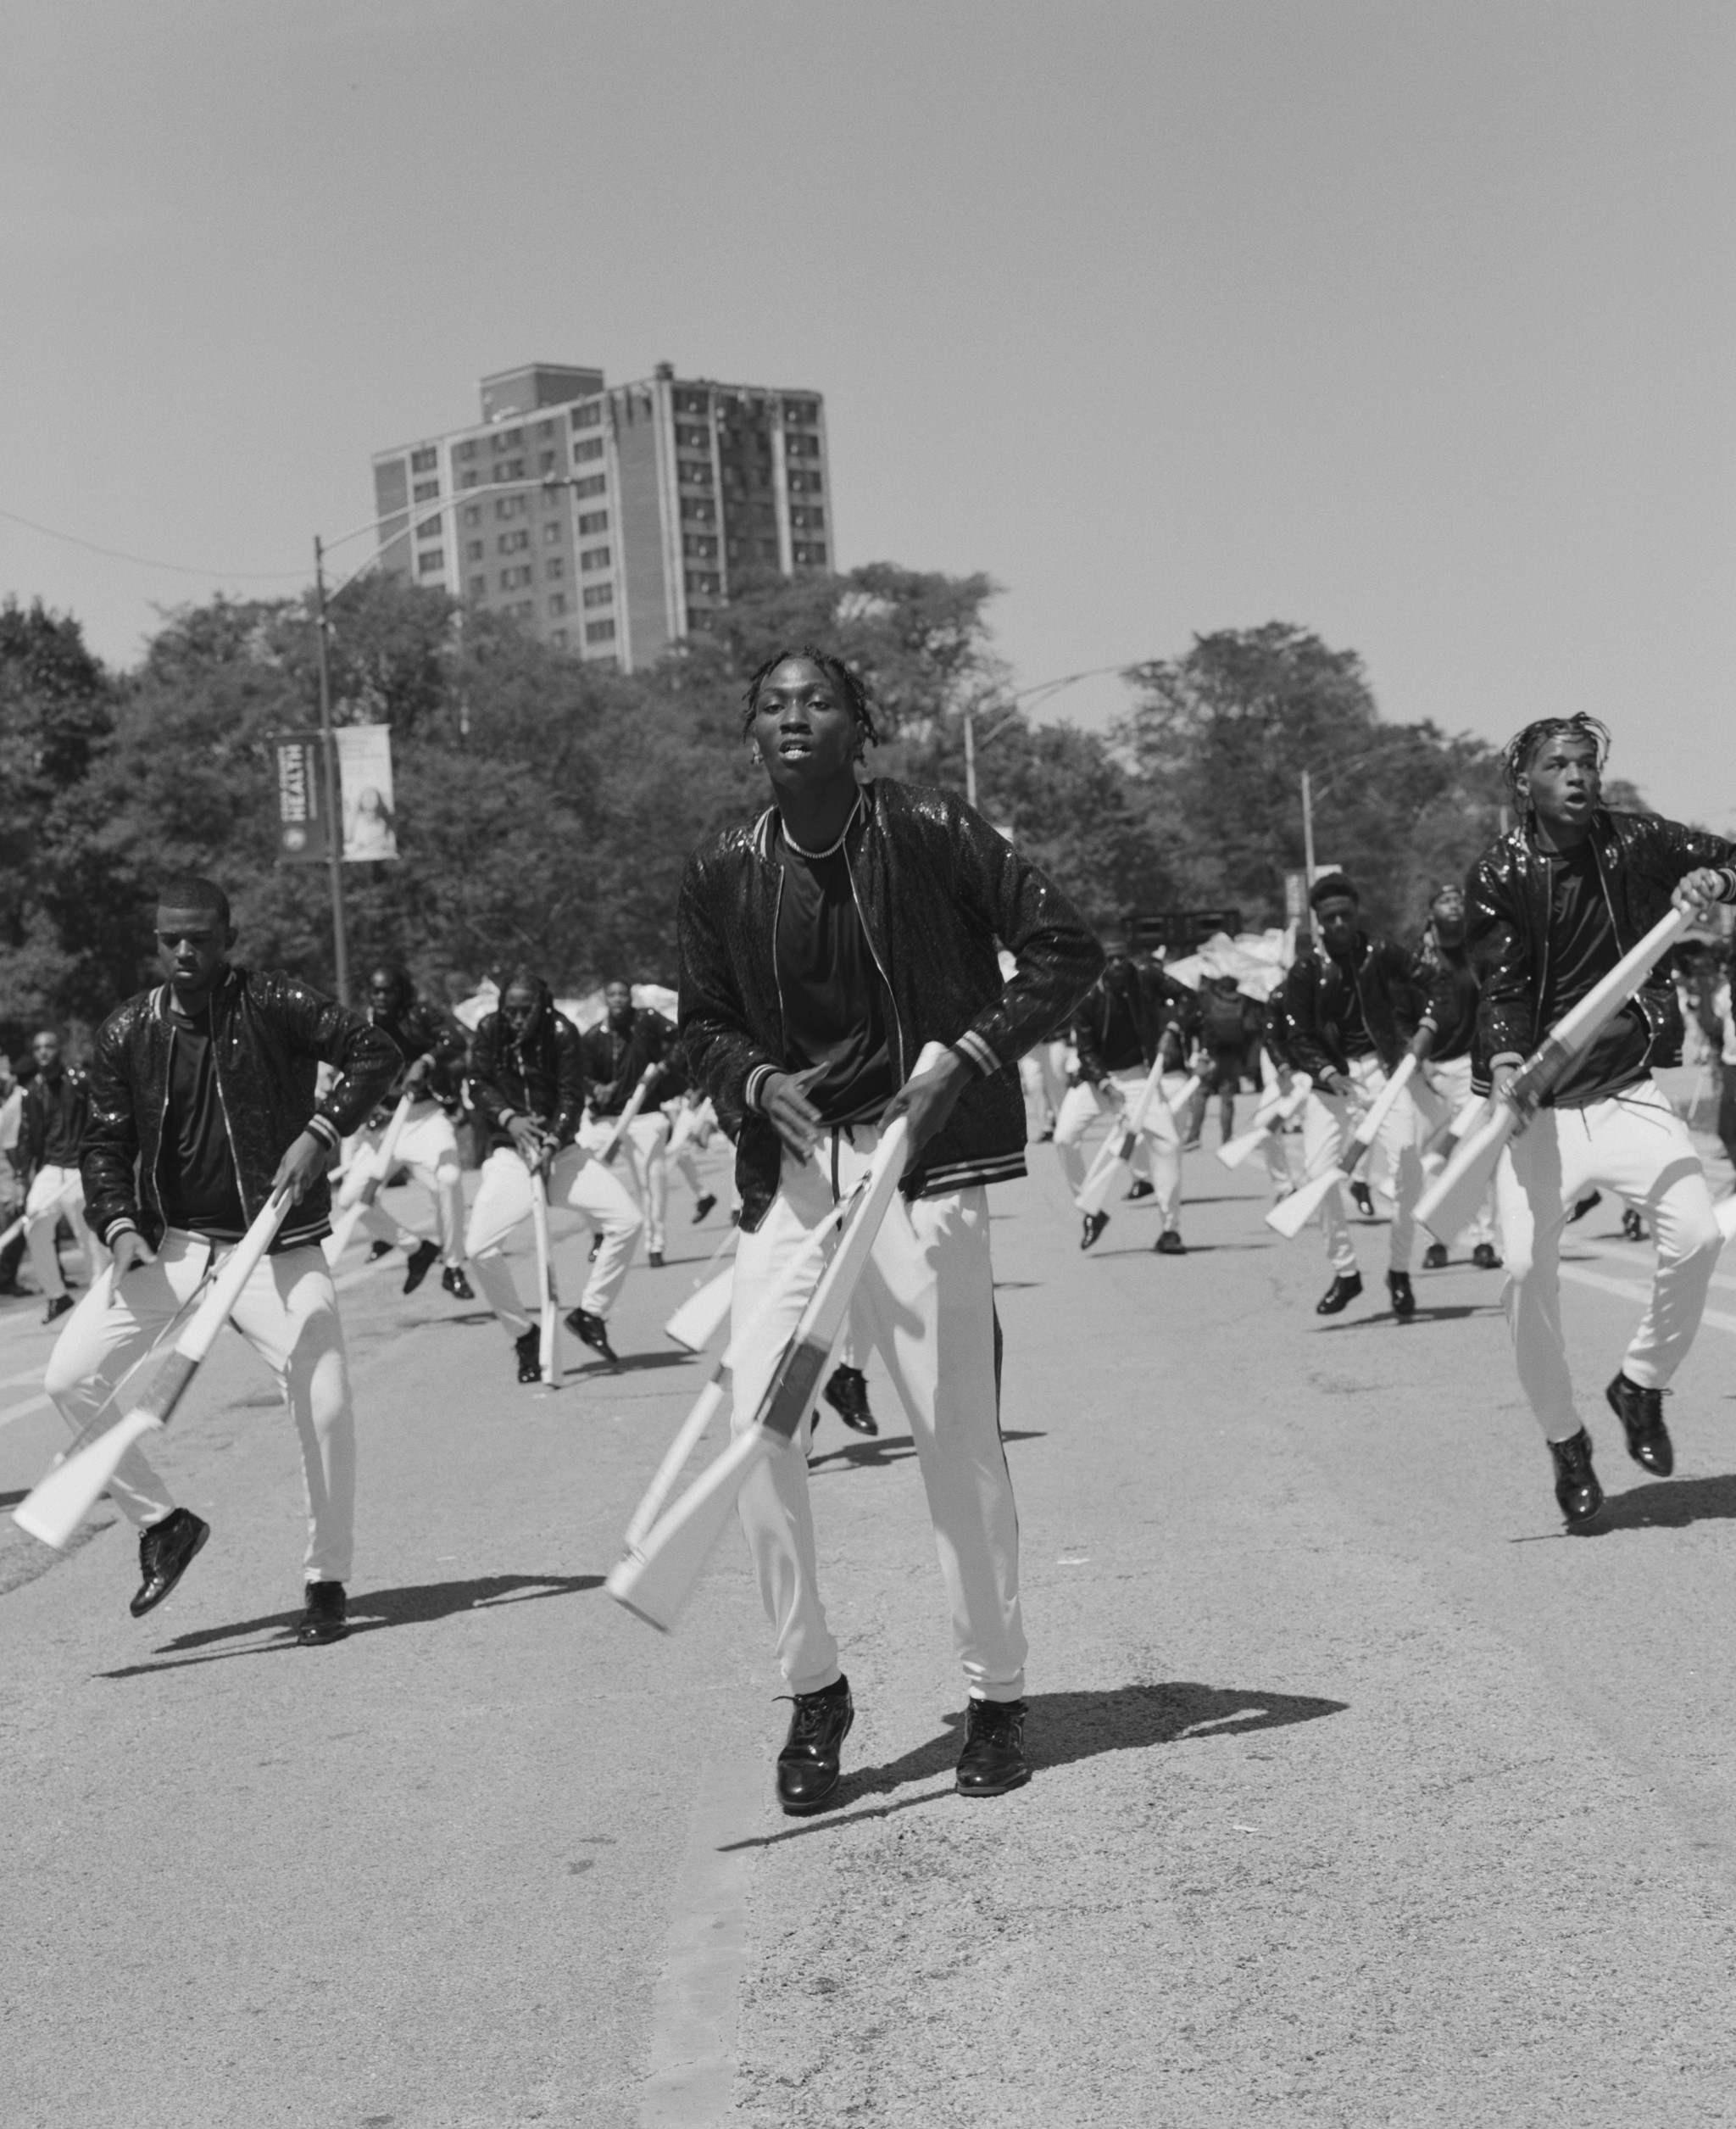 Photograph of South Shore Drill Team during a performance. Performers are wearing white pants and dark jackets and twirling wooden rifles. 